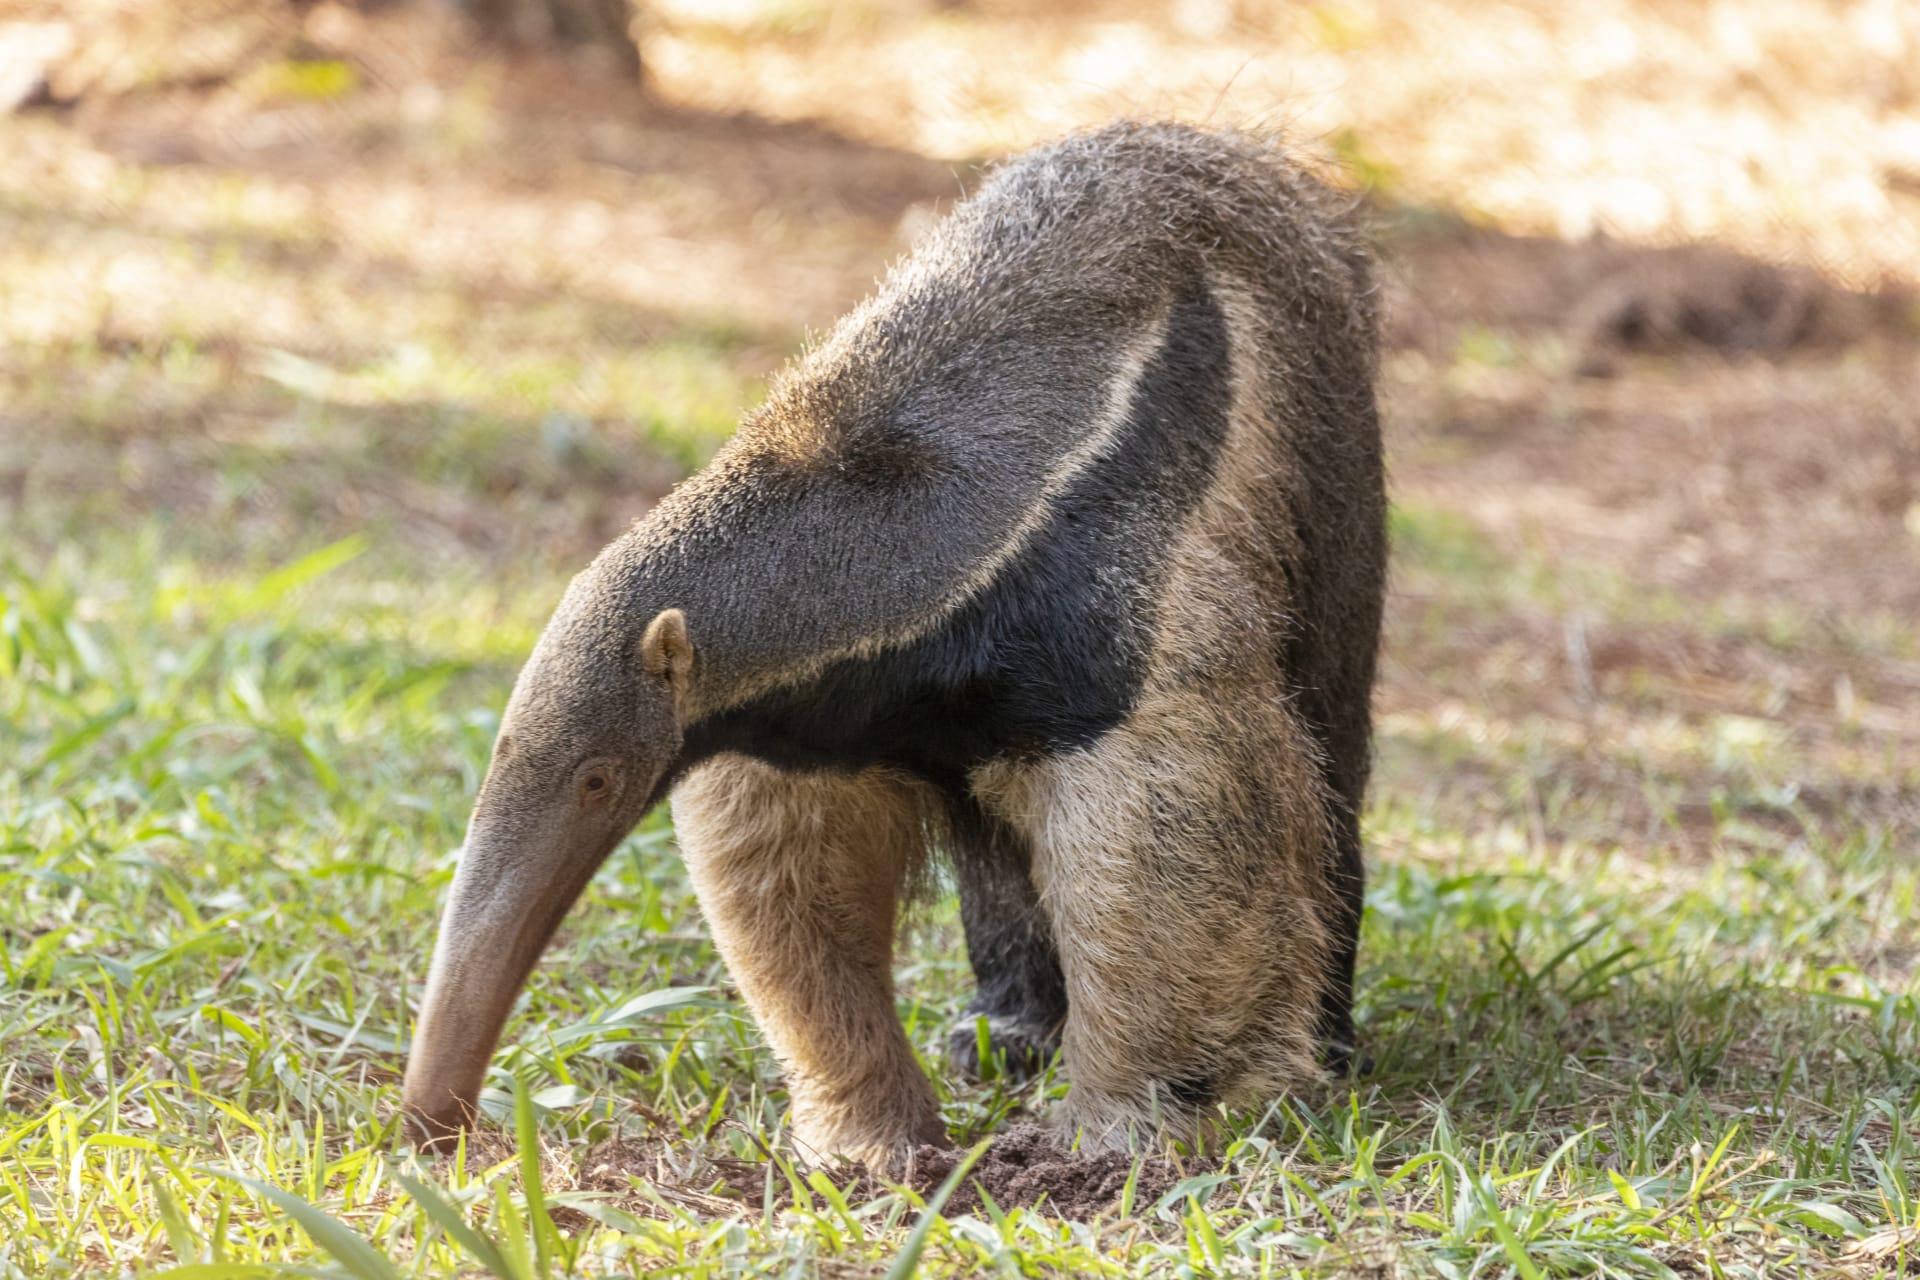 Anteater pictures